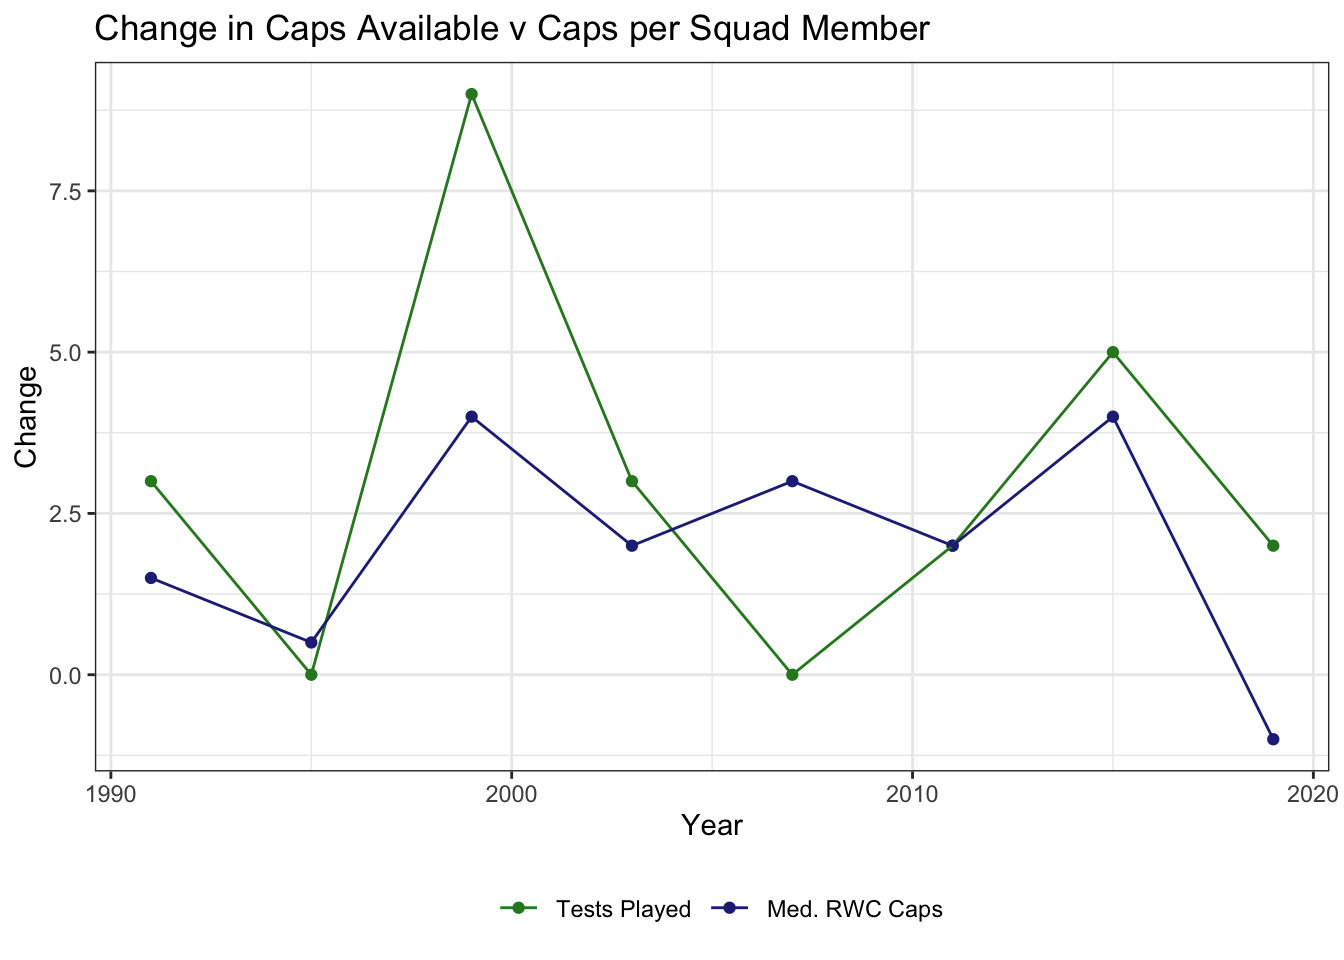 Fig. 4: Caps Available v Squad Caps at the RWC